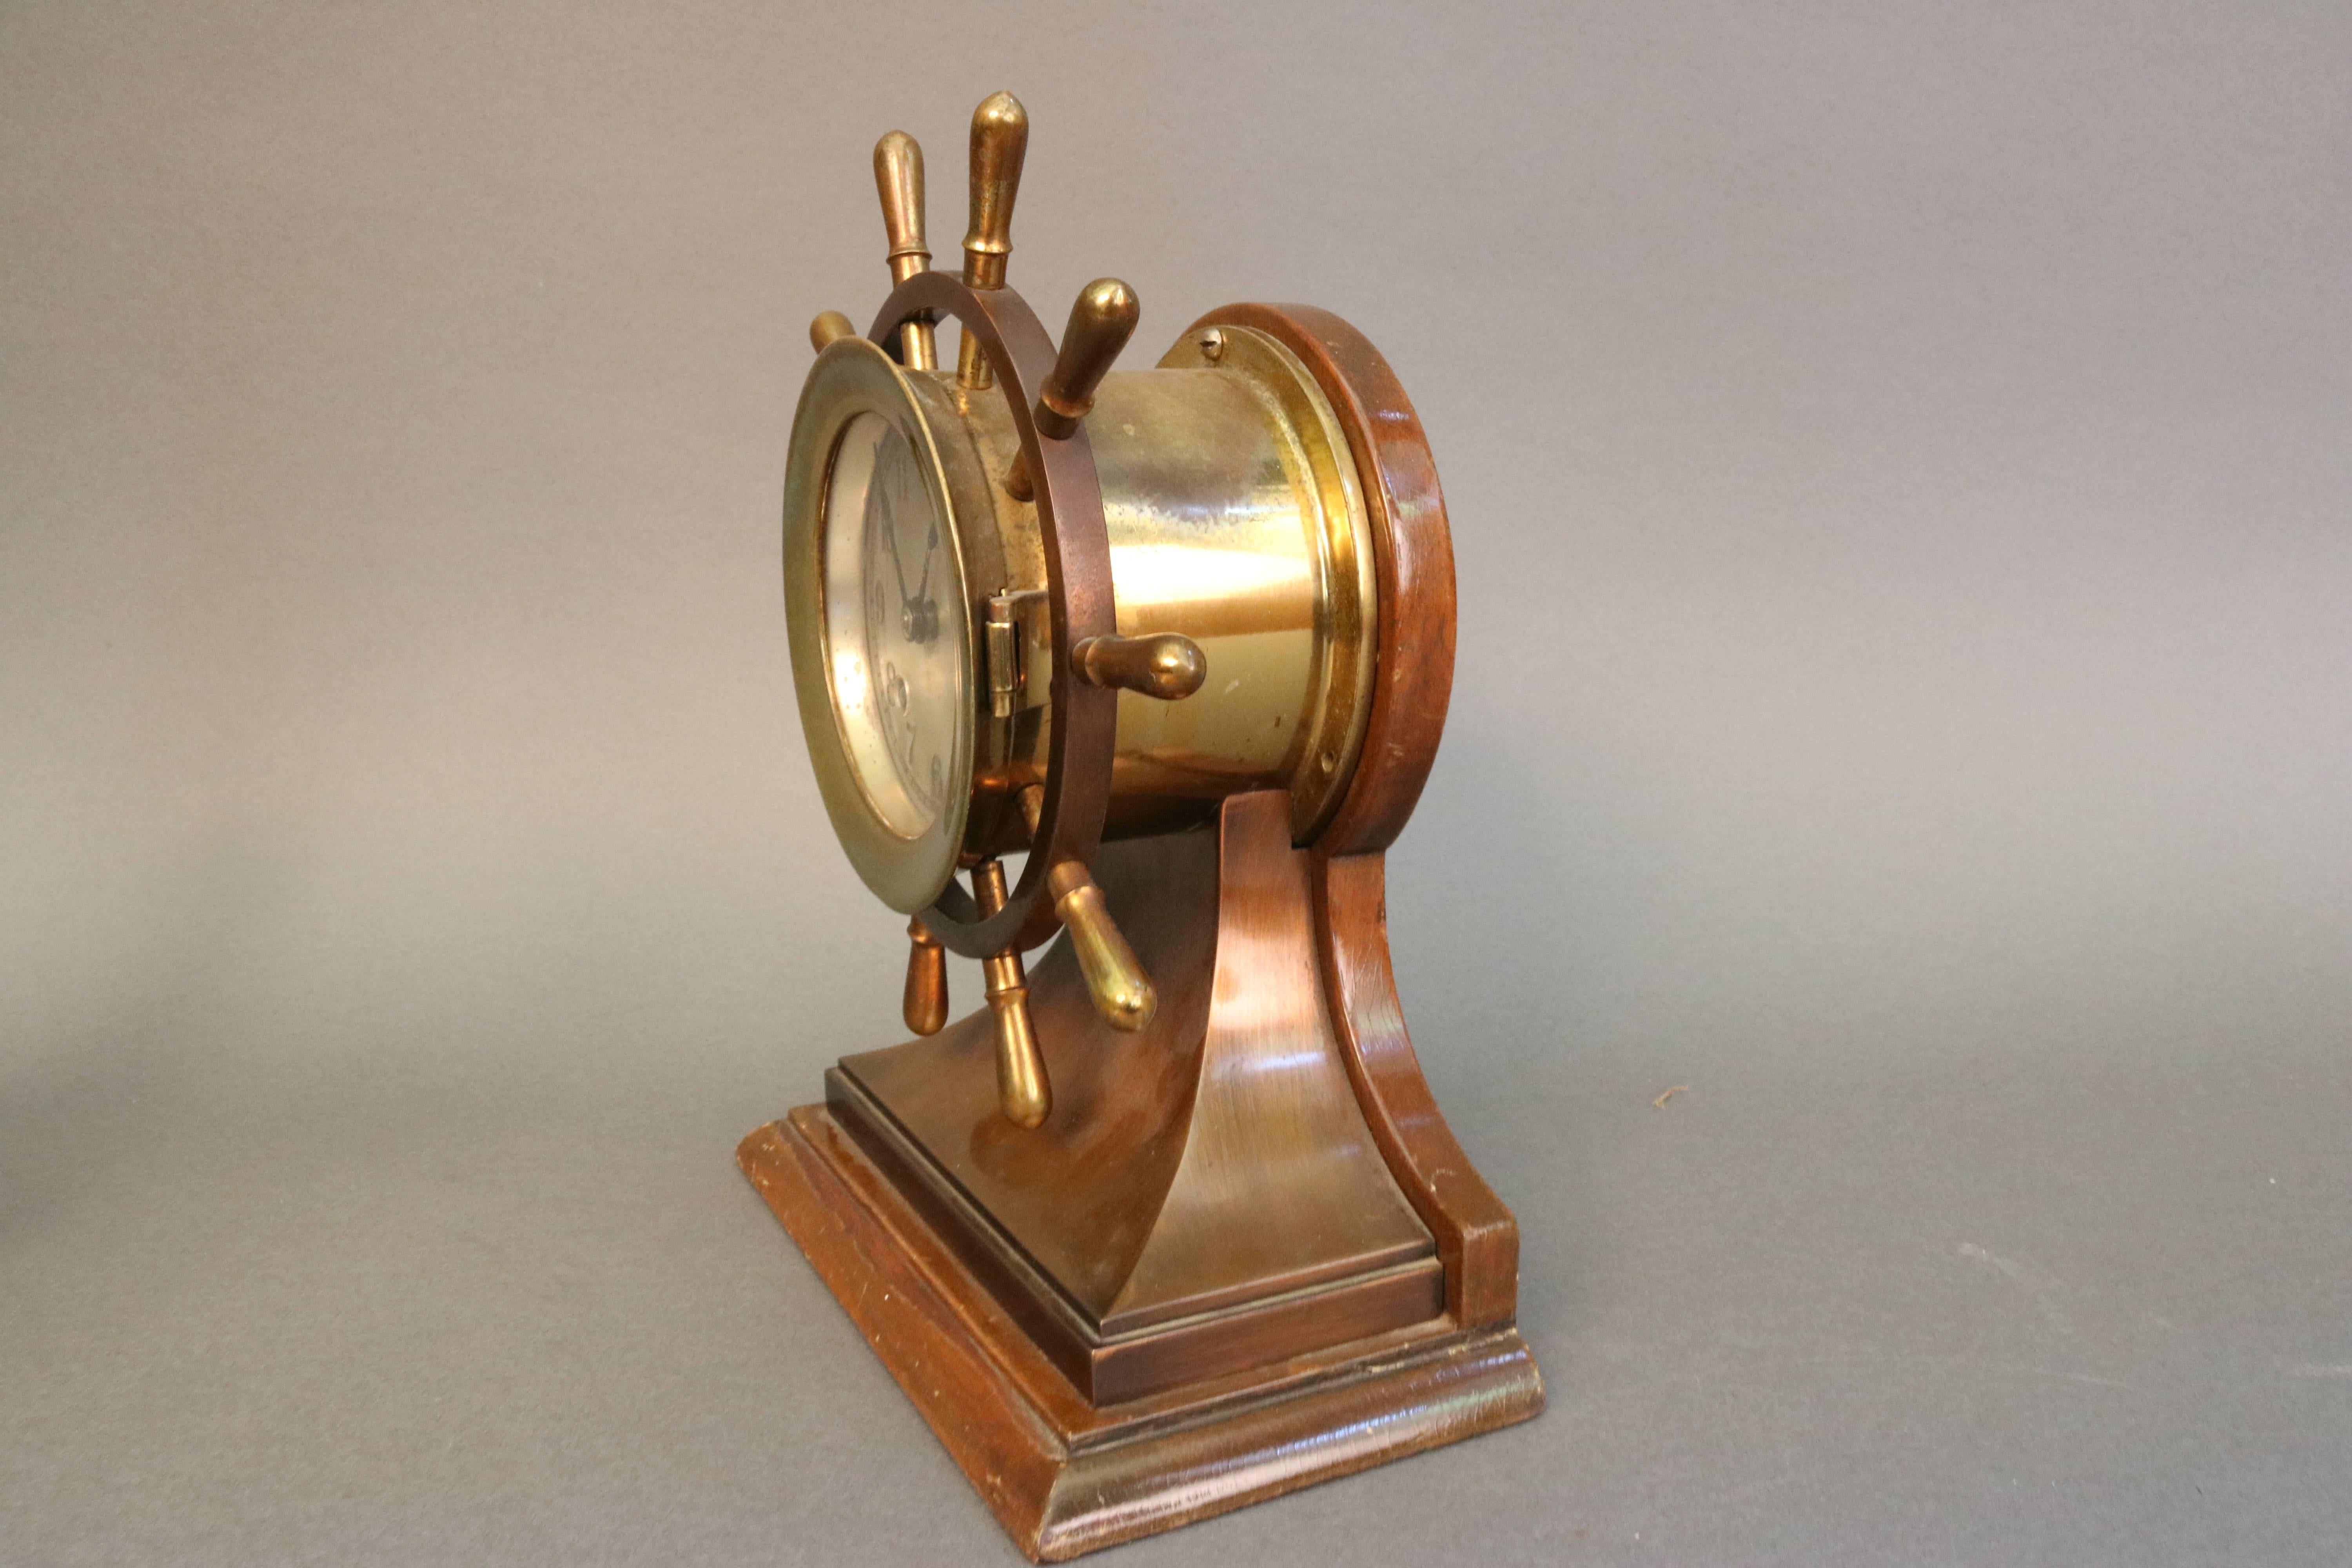 An American 20th century 3-1/2 inch ship's wheel clock unsigned and in the form of a Chelsea "Mariner." The clock features a slivered face, blackened Arabic numerals, simple hands, double barrel key winds for the movement and the strike,